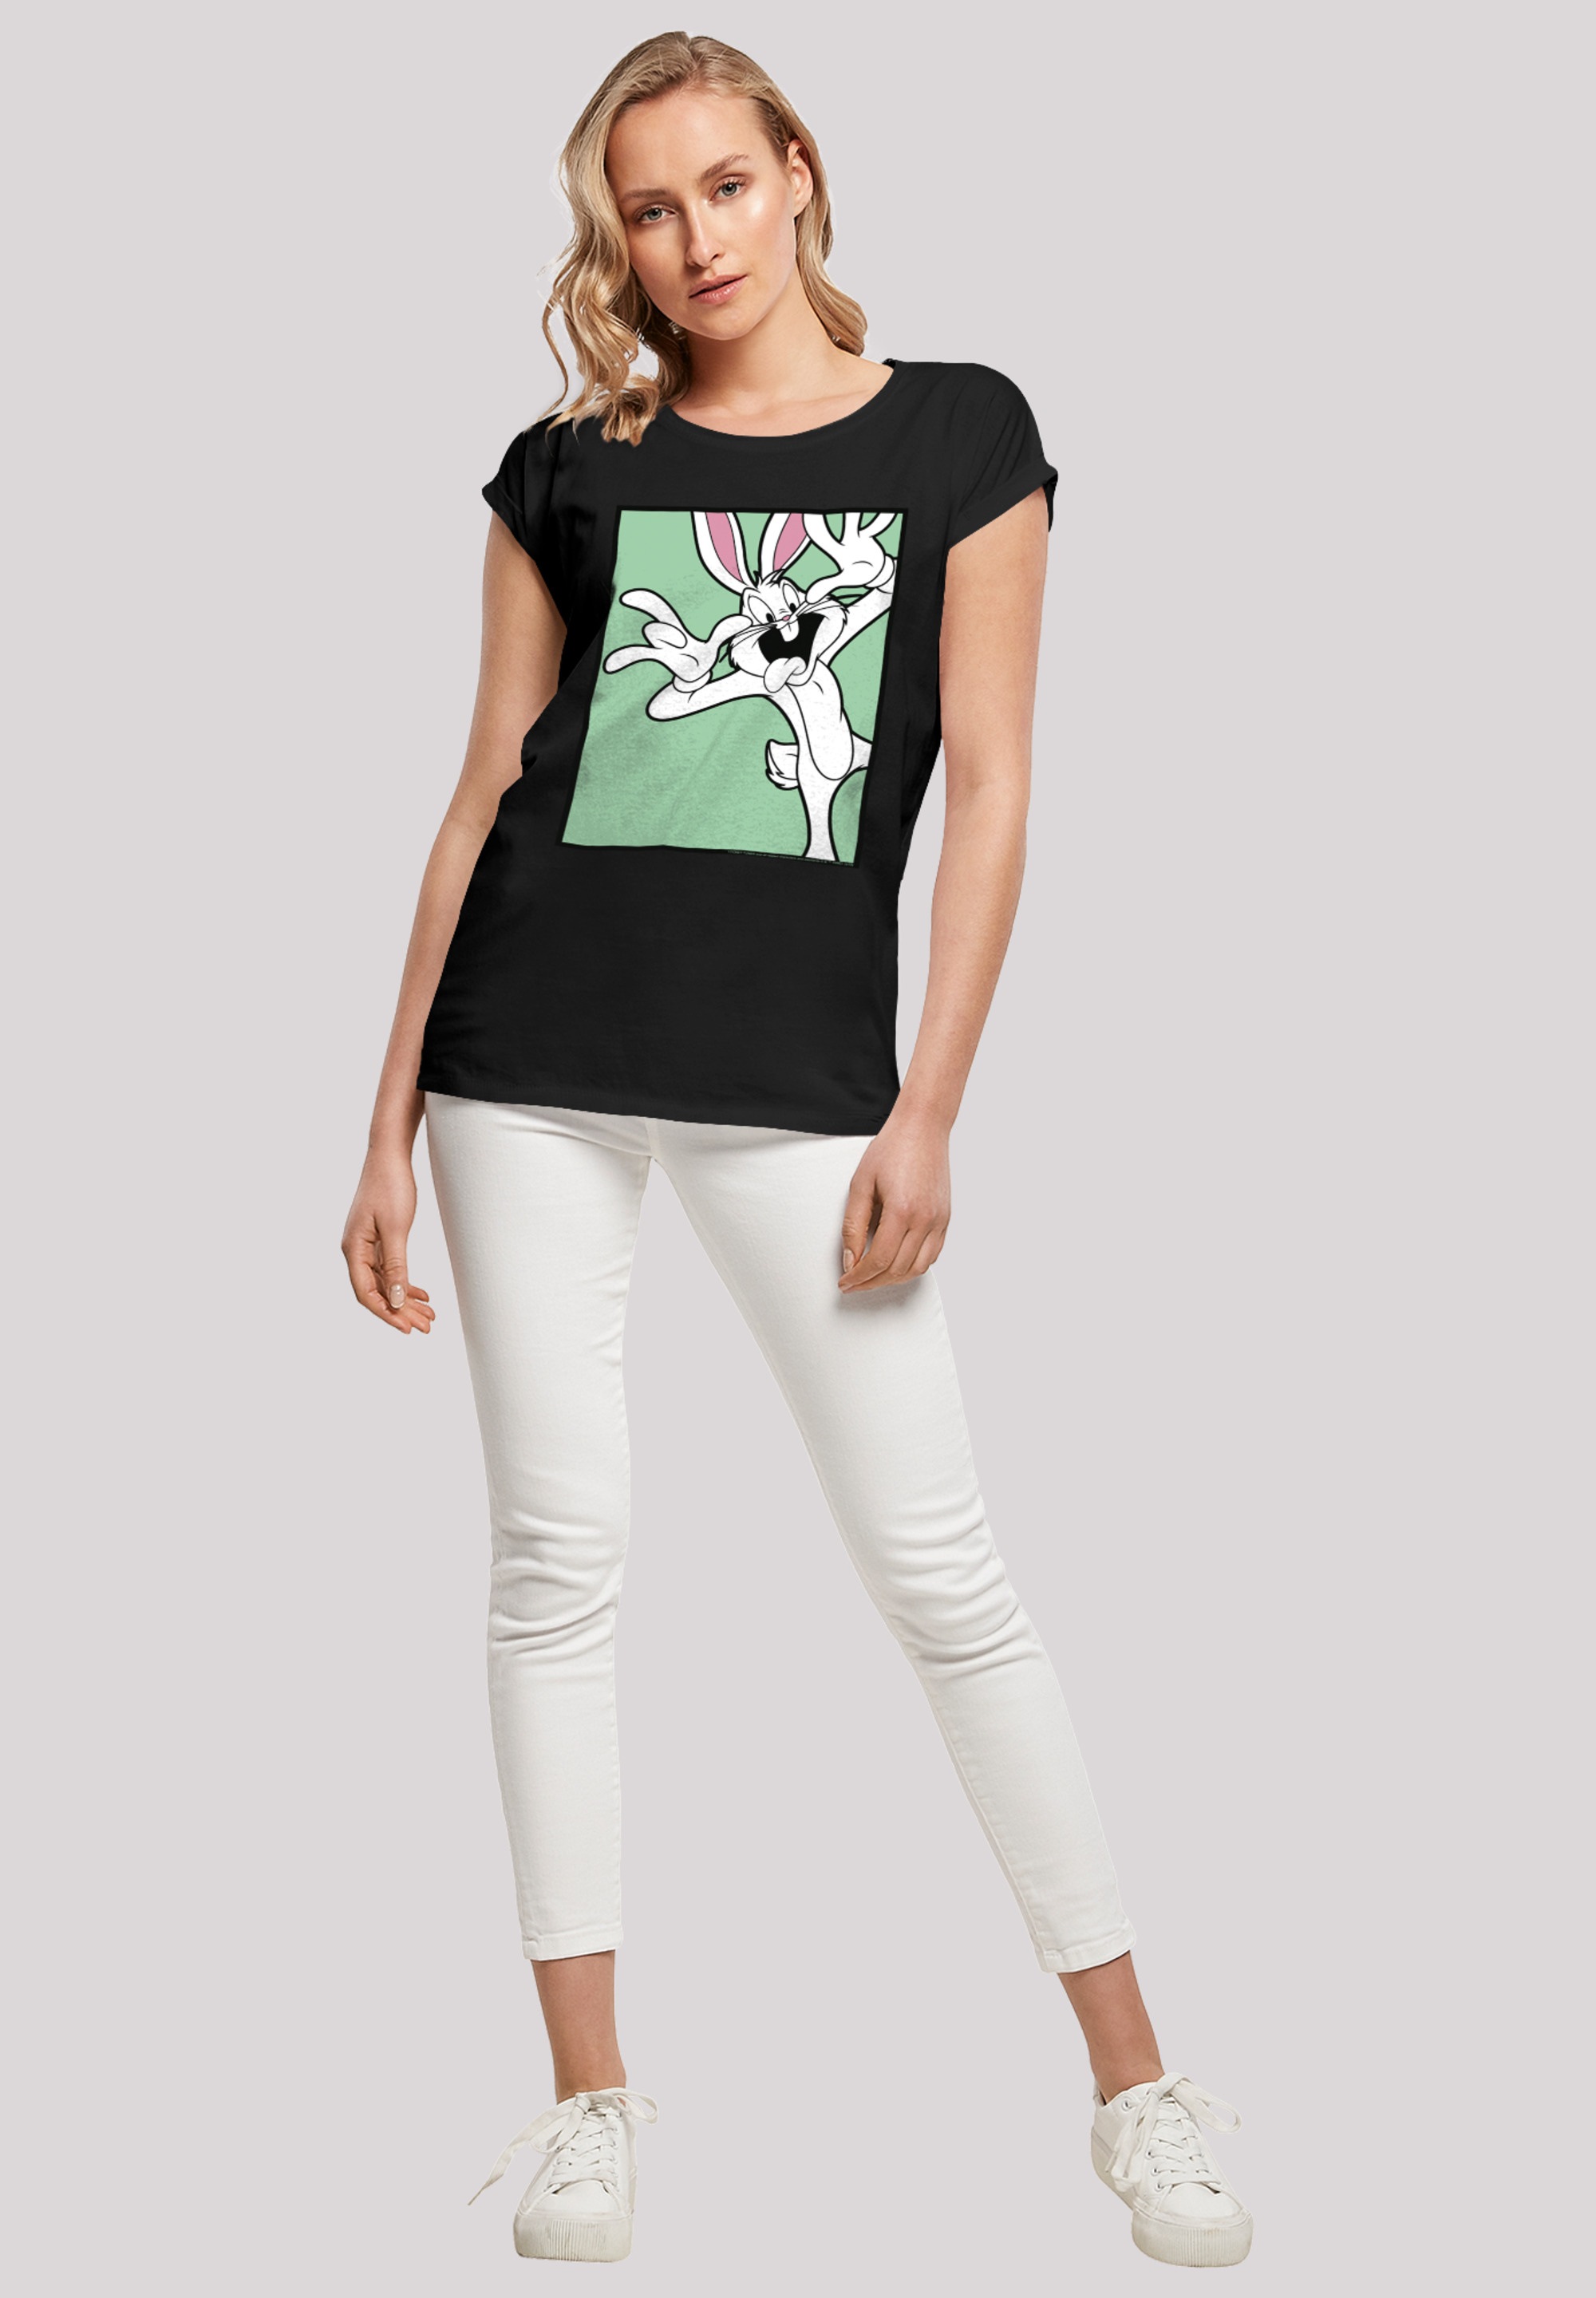 Top-Experte Black Friday F4NT4STIC T-Shirt »Looney Bunny Tunes Face«, BAUR Funny | Print Bugs